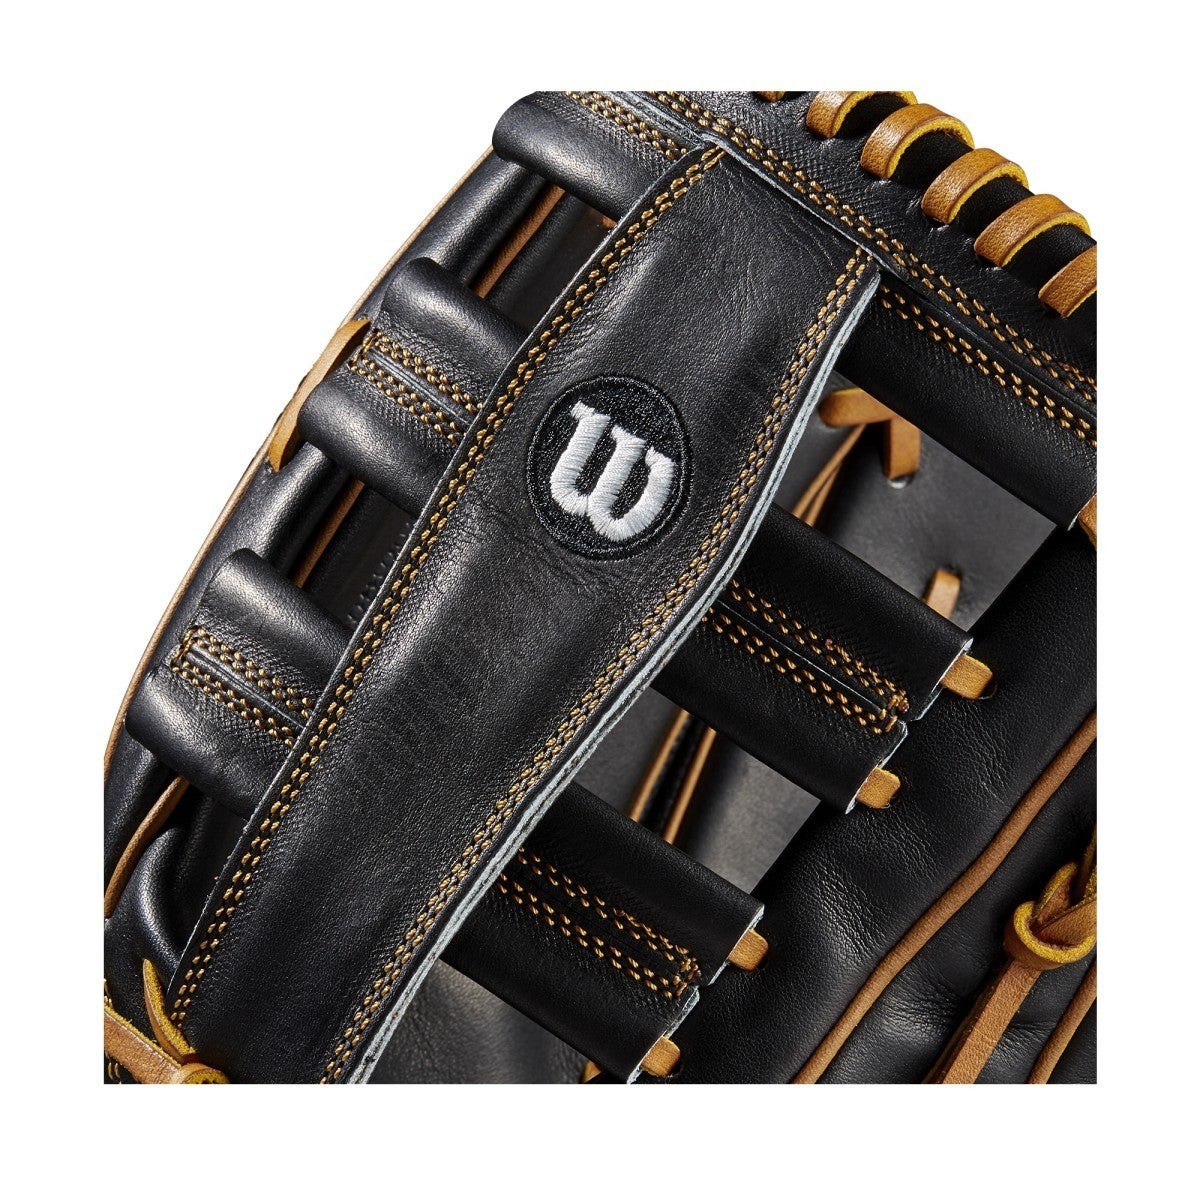 2020 A2K 1775 12.75" Outfield Baseball Glove ● Wilson Promotions - -5